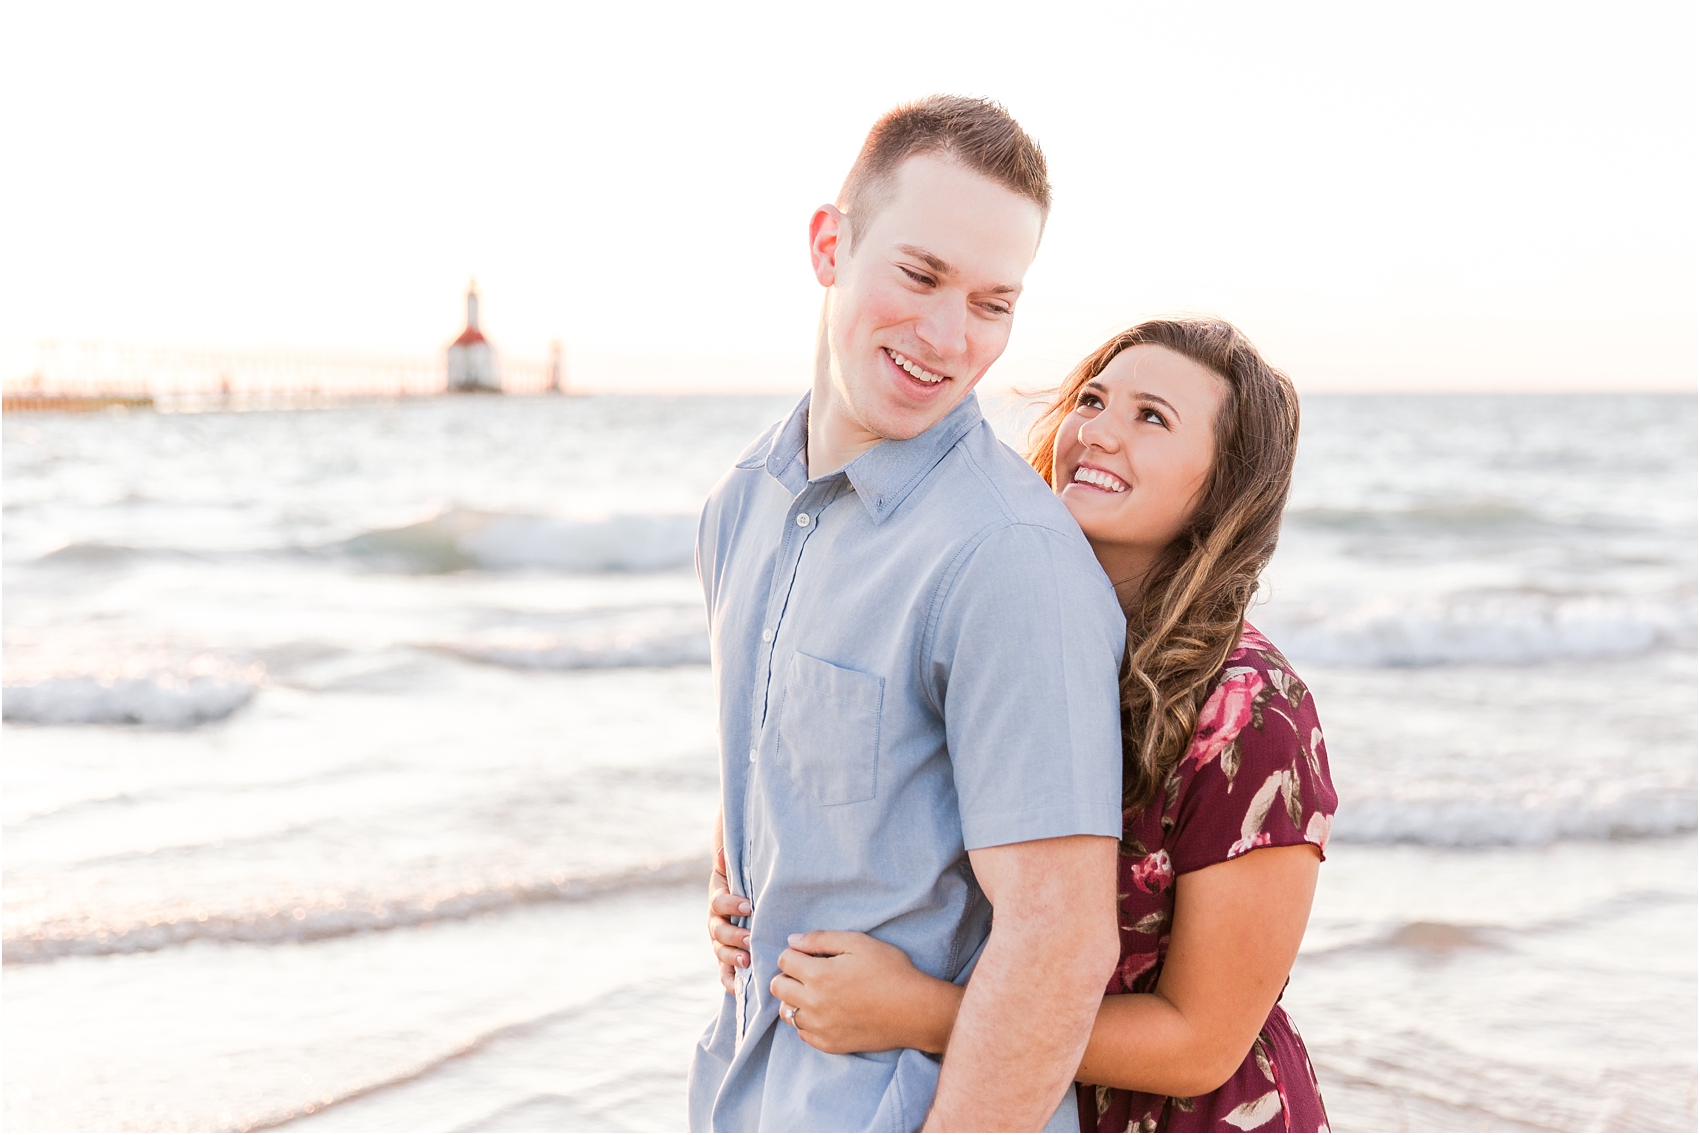 candid-end-of-summer-sunset-engagement-photos-at-silver-beach-in-st-joseph-mi-by-courtney-carolyn-photography_0001.jpg